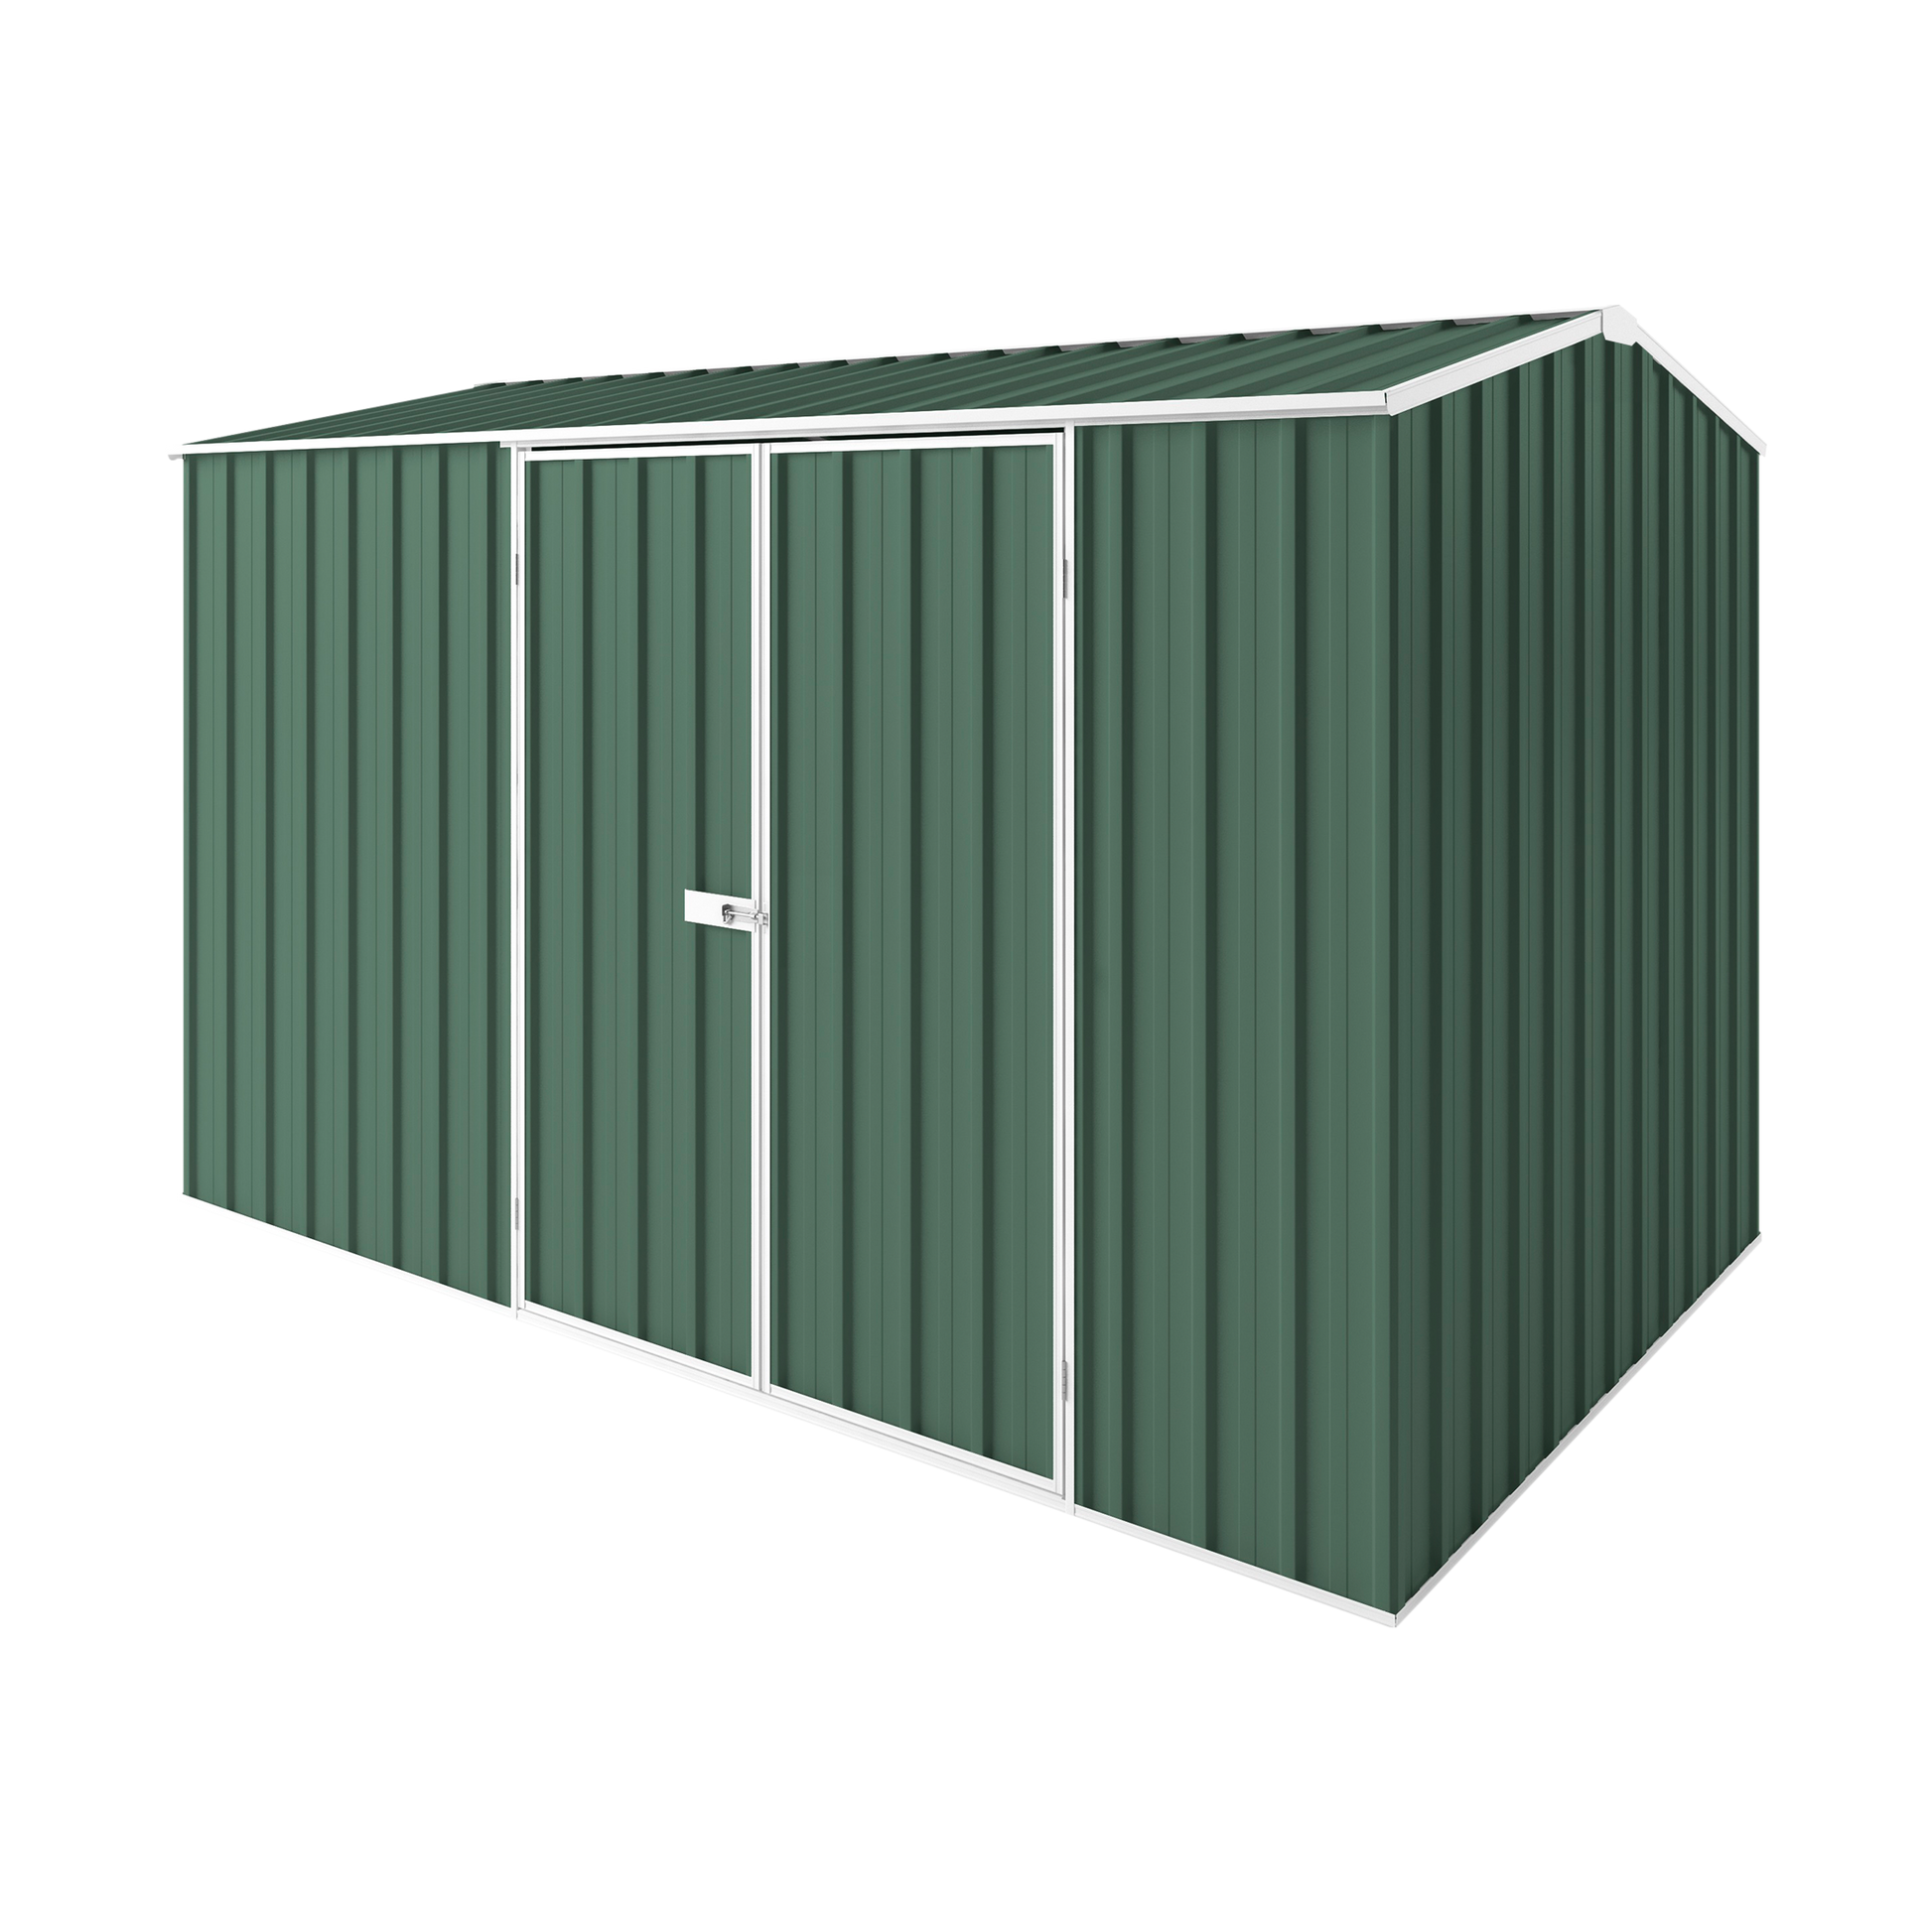 3.75m x 2.25m Gable Roof Garden Shed - EasyShed